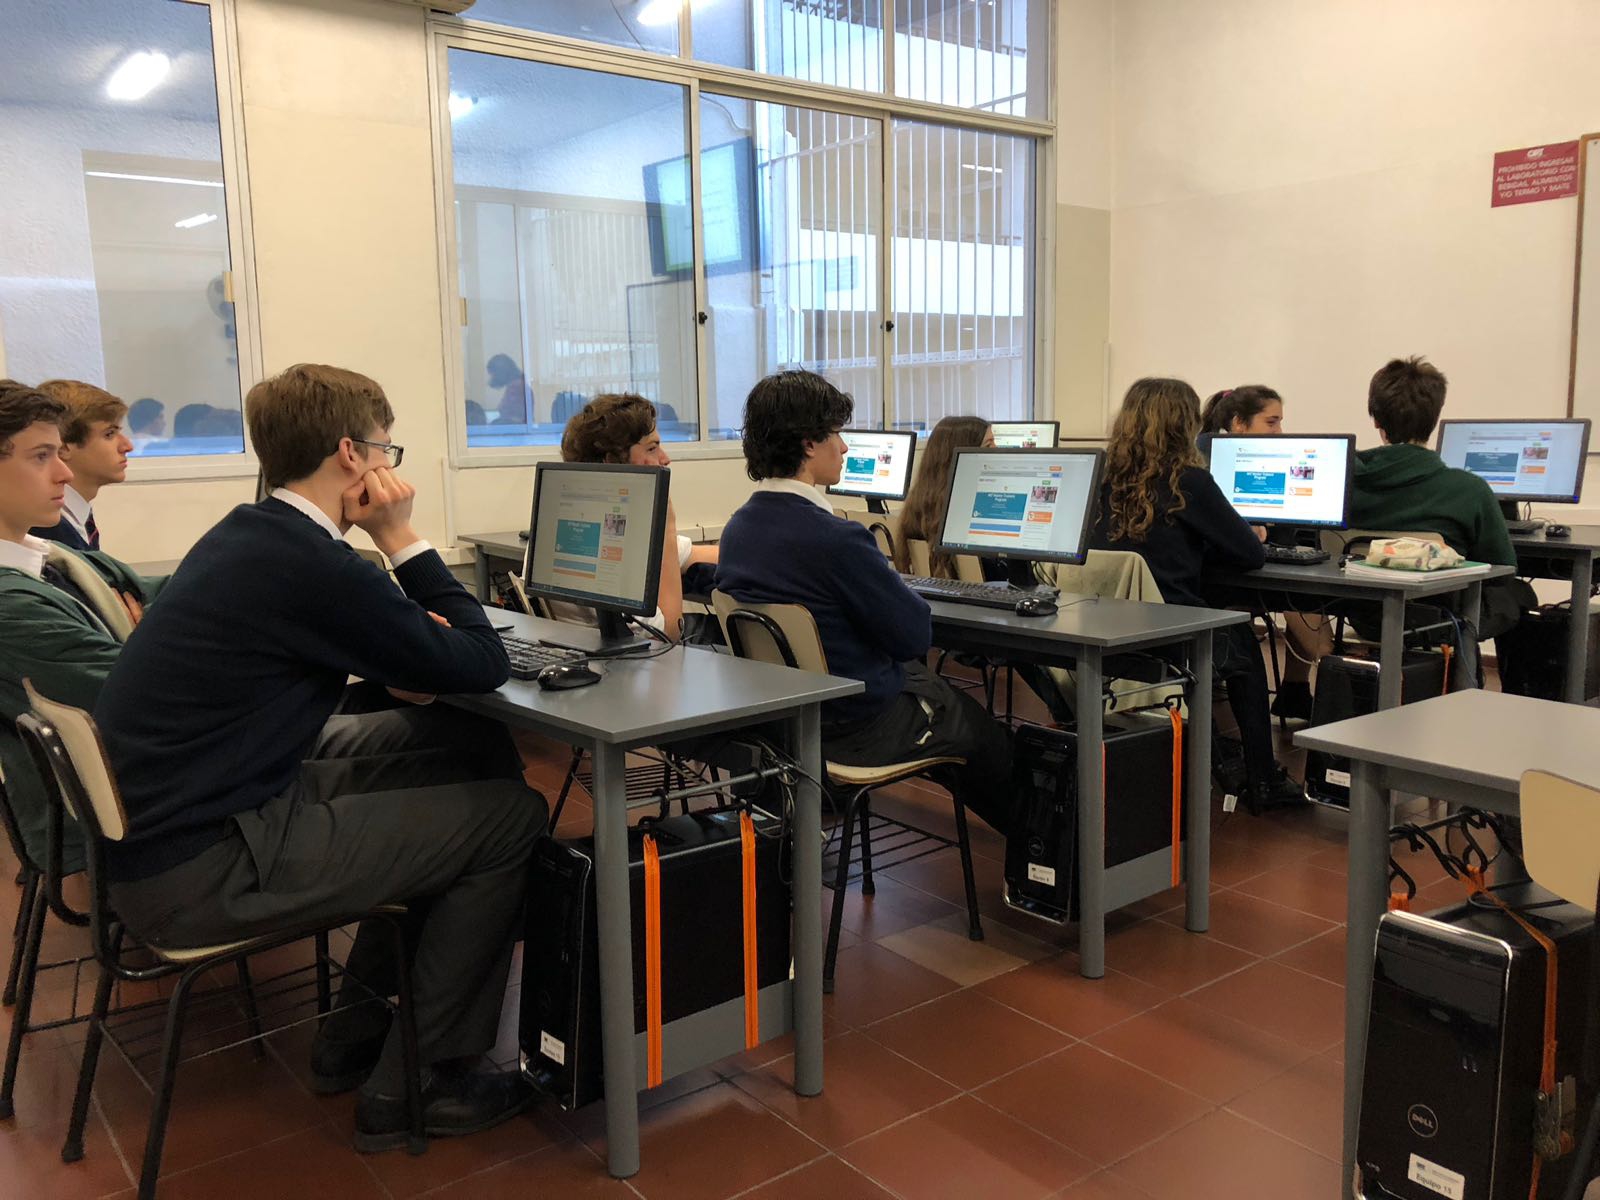 5YL IB COMPUTER SCIENCE - Visit to ORT UNIVERSITY